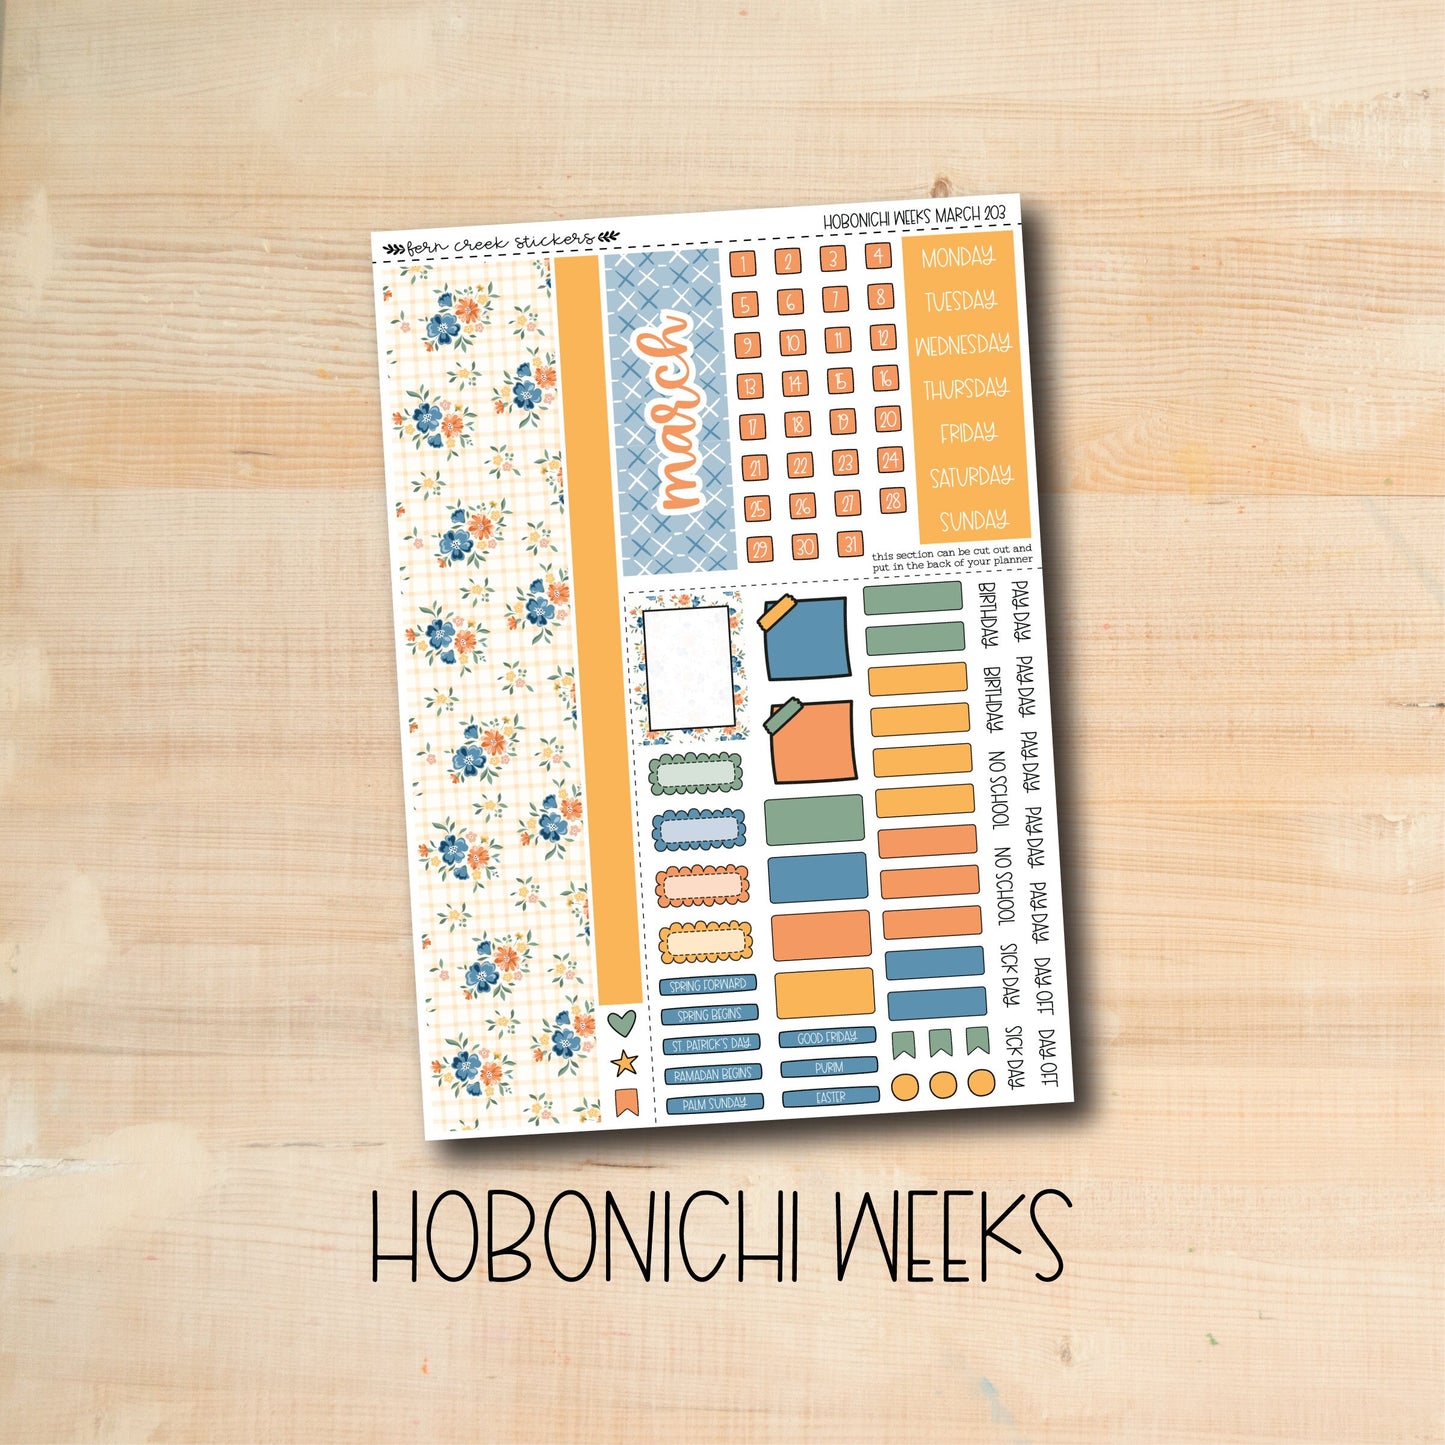 the hobonichi weeks stickers are displayed on a wooden surface